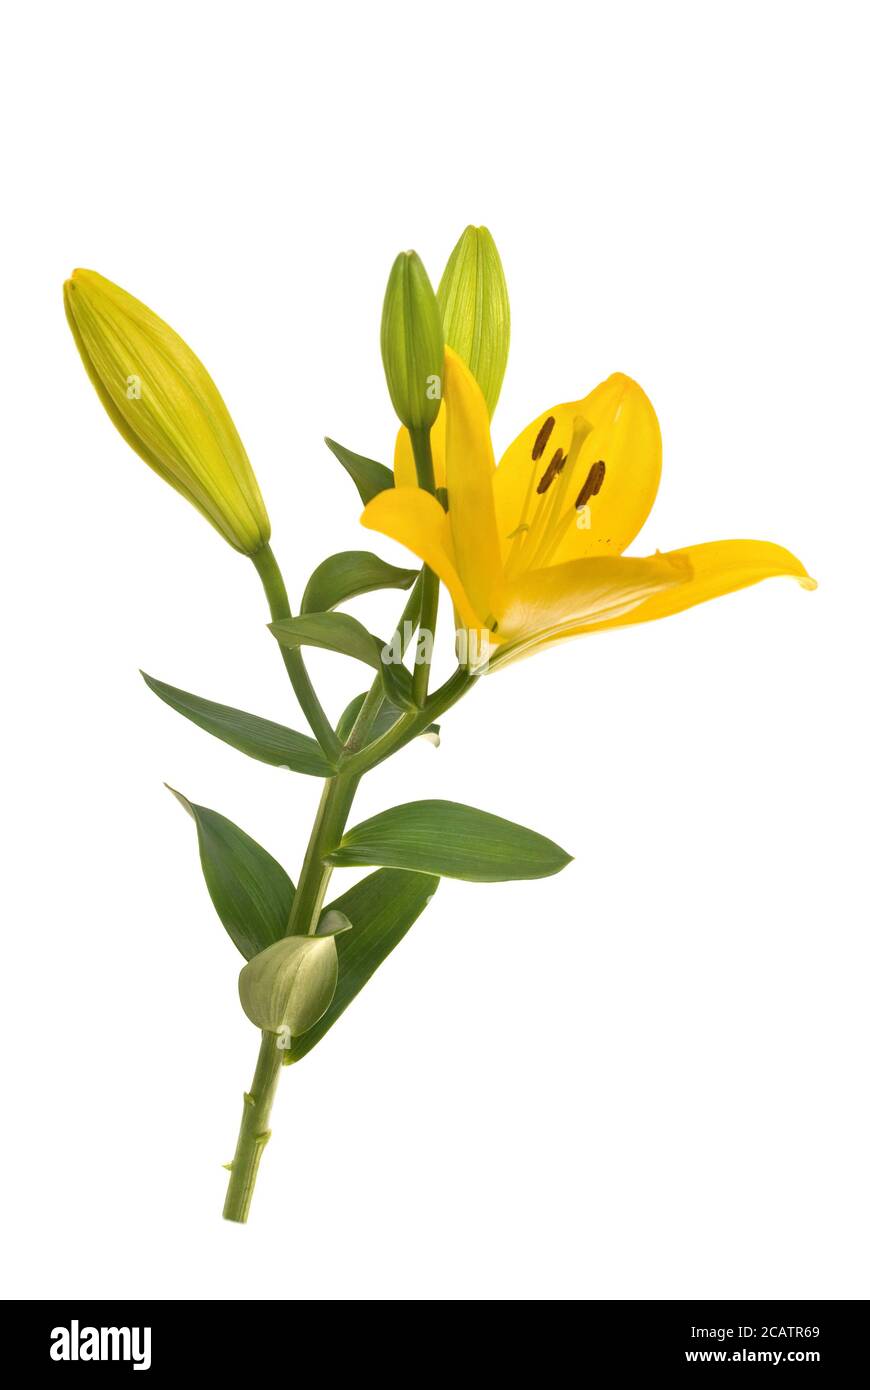 yellow lily against white background Stock Photo